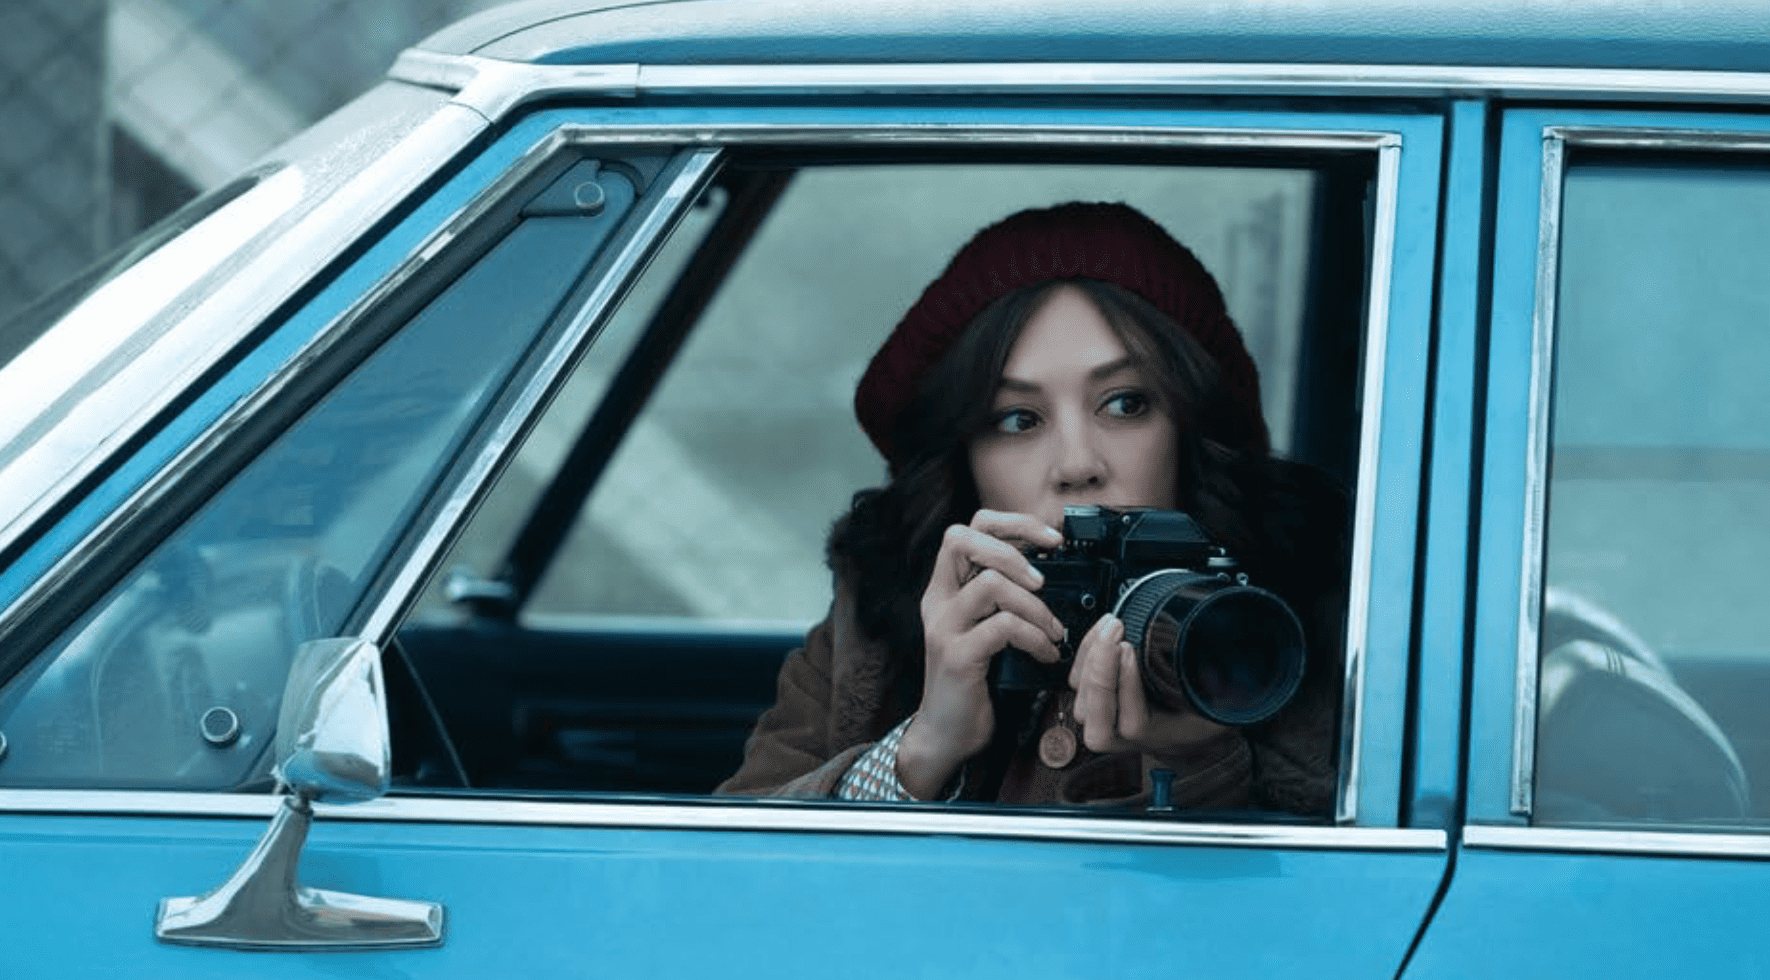 A woman leans out of a parked car holding a camera, presumably surveilling someone in this image from Thunder Road Pictures.